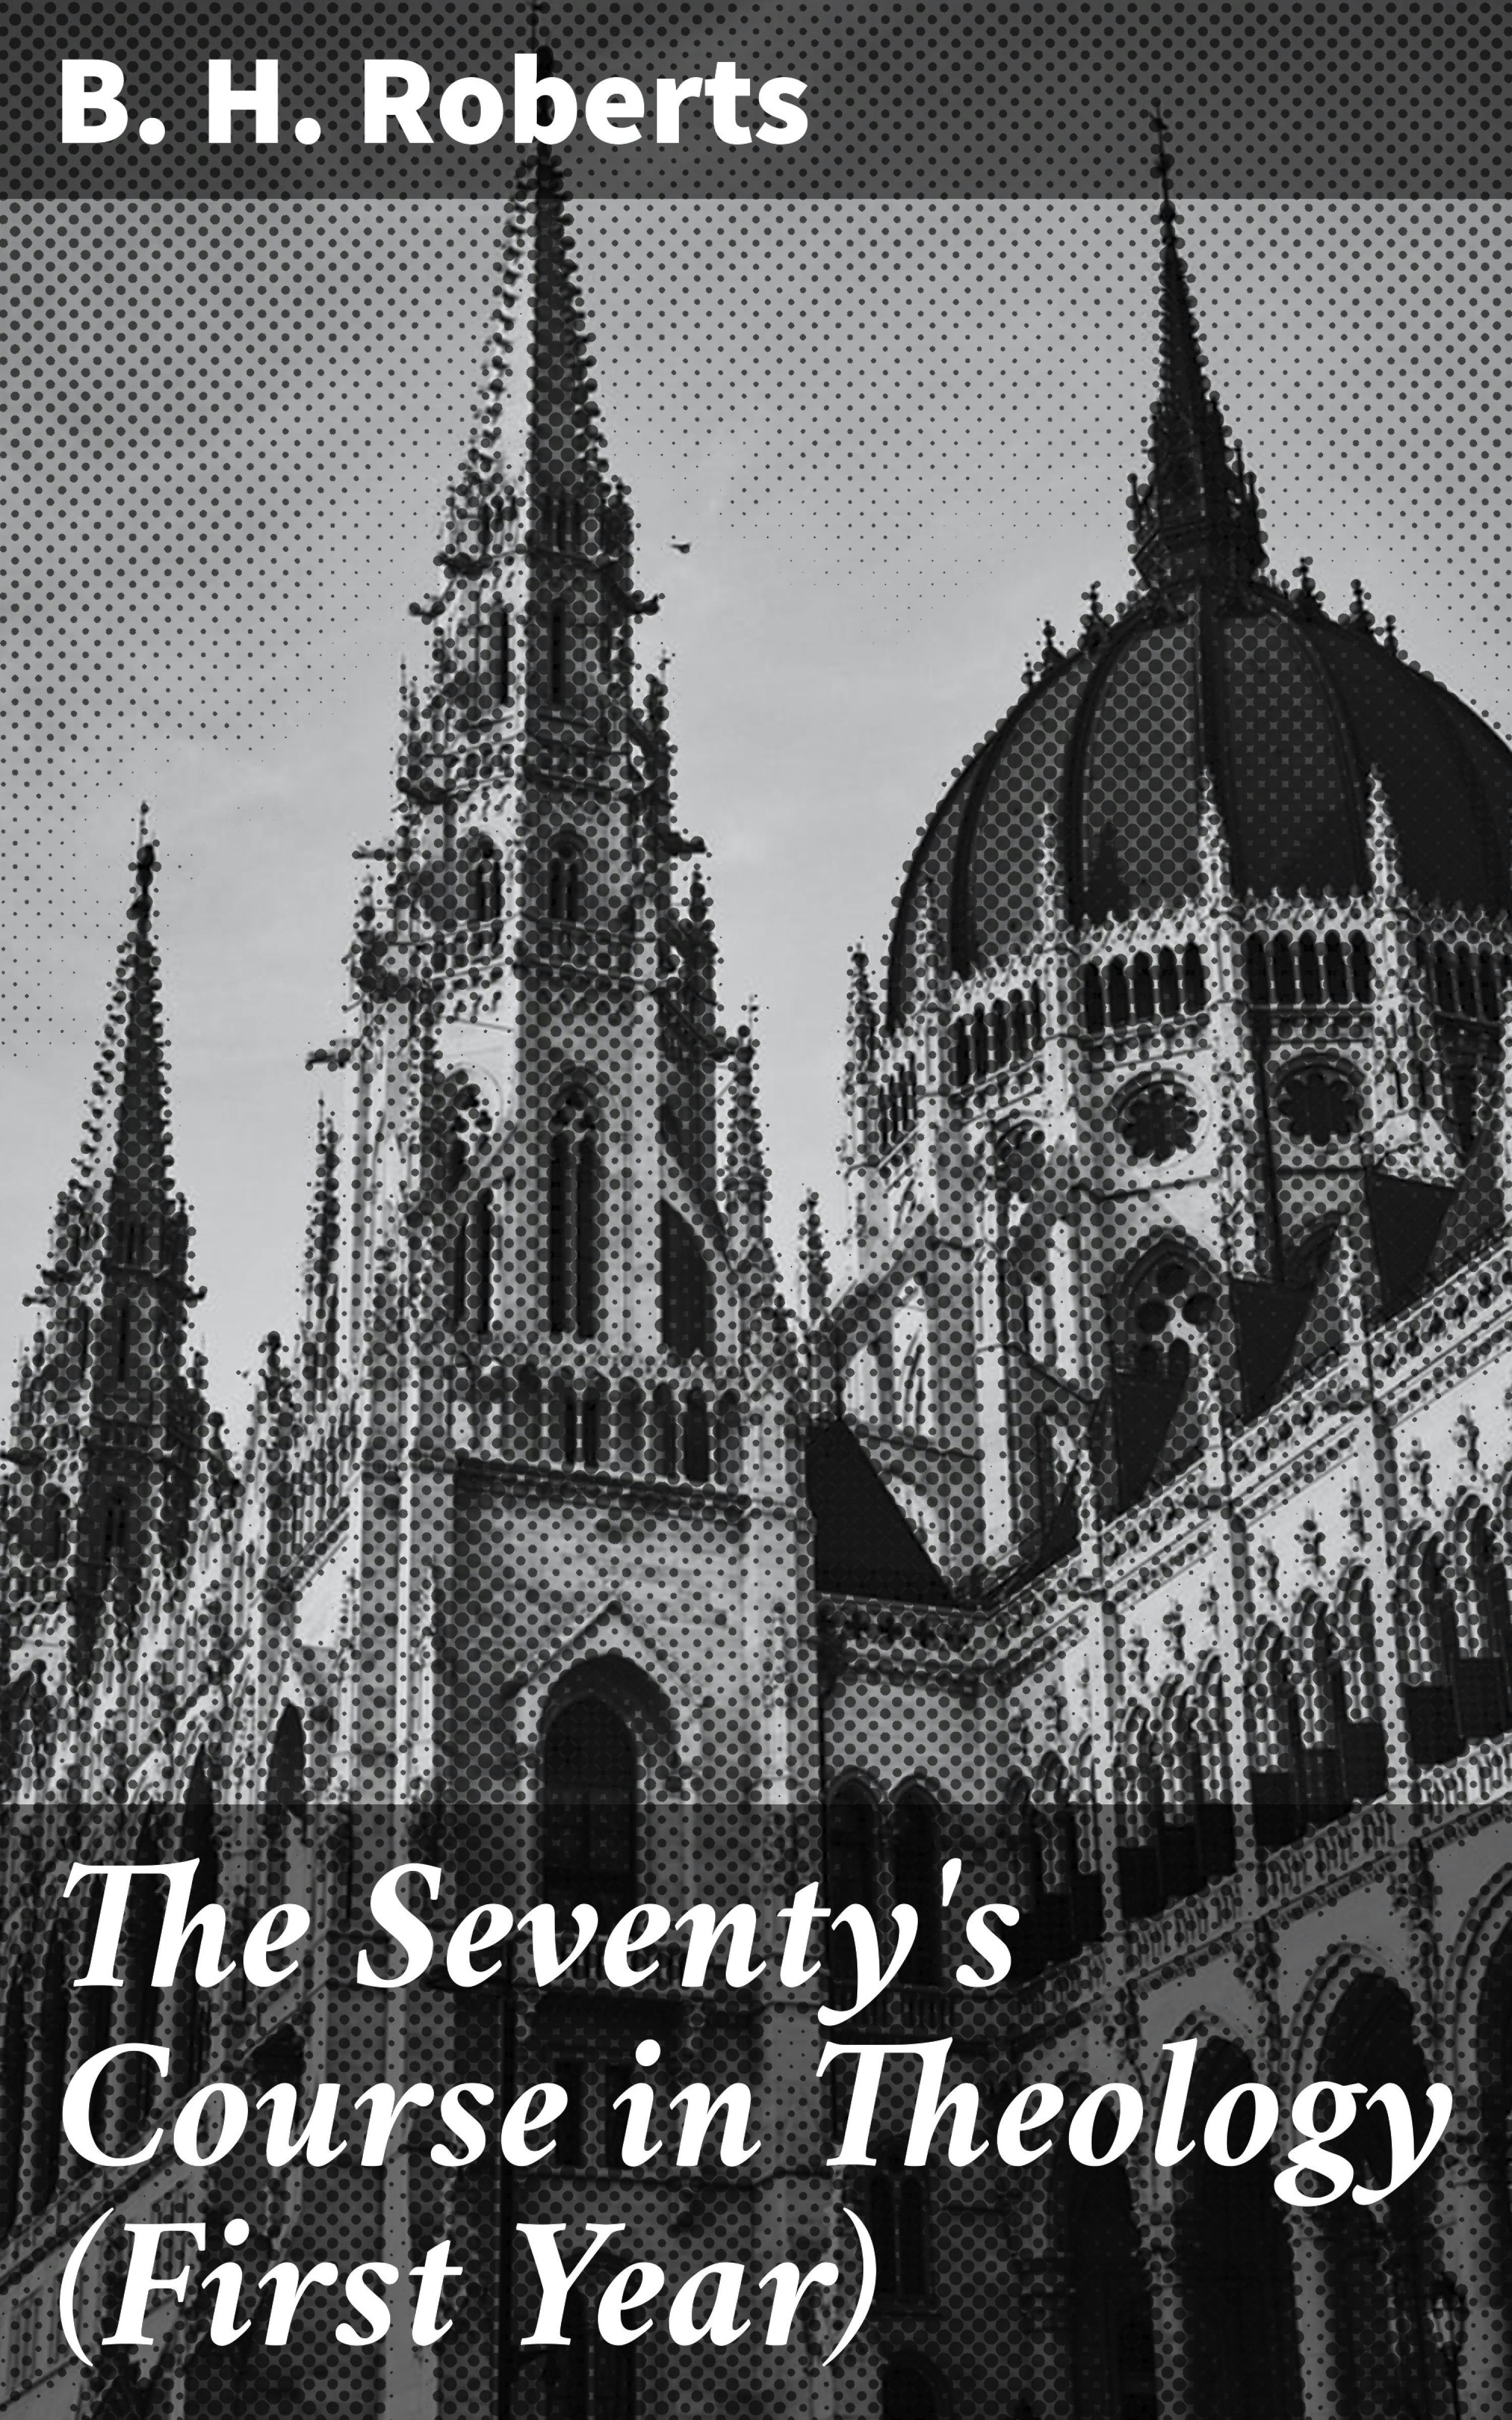 The Seventy's Course in Theology (First Year): Outline History of the Seventy and A Survey of the Books of Holy Scripture - B. H. Roberts